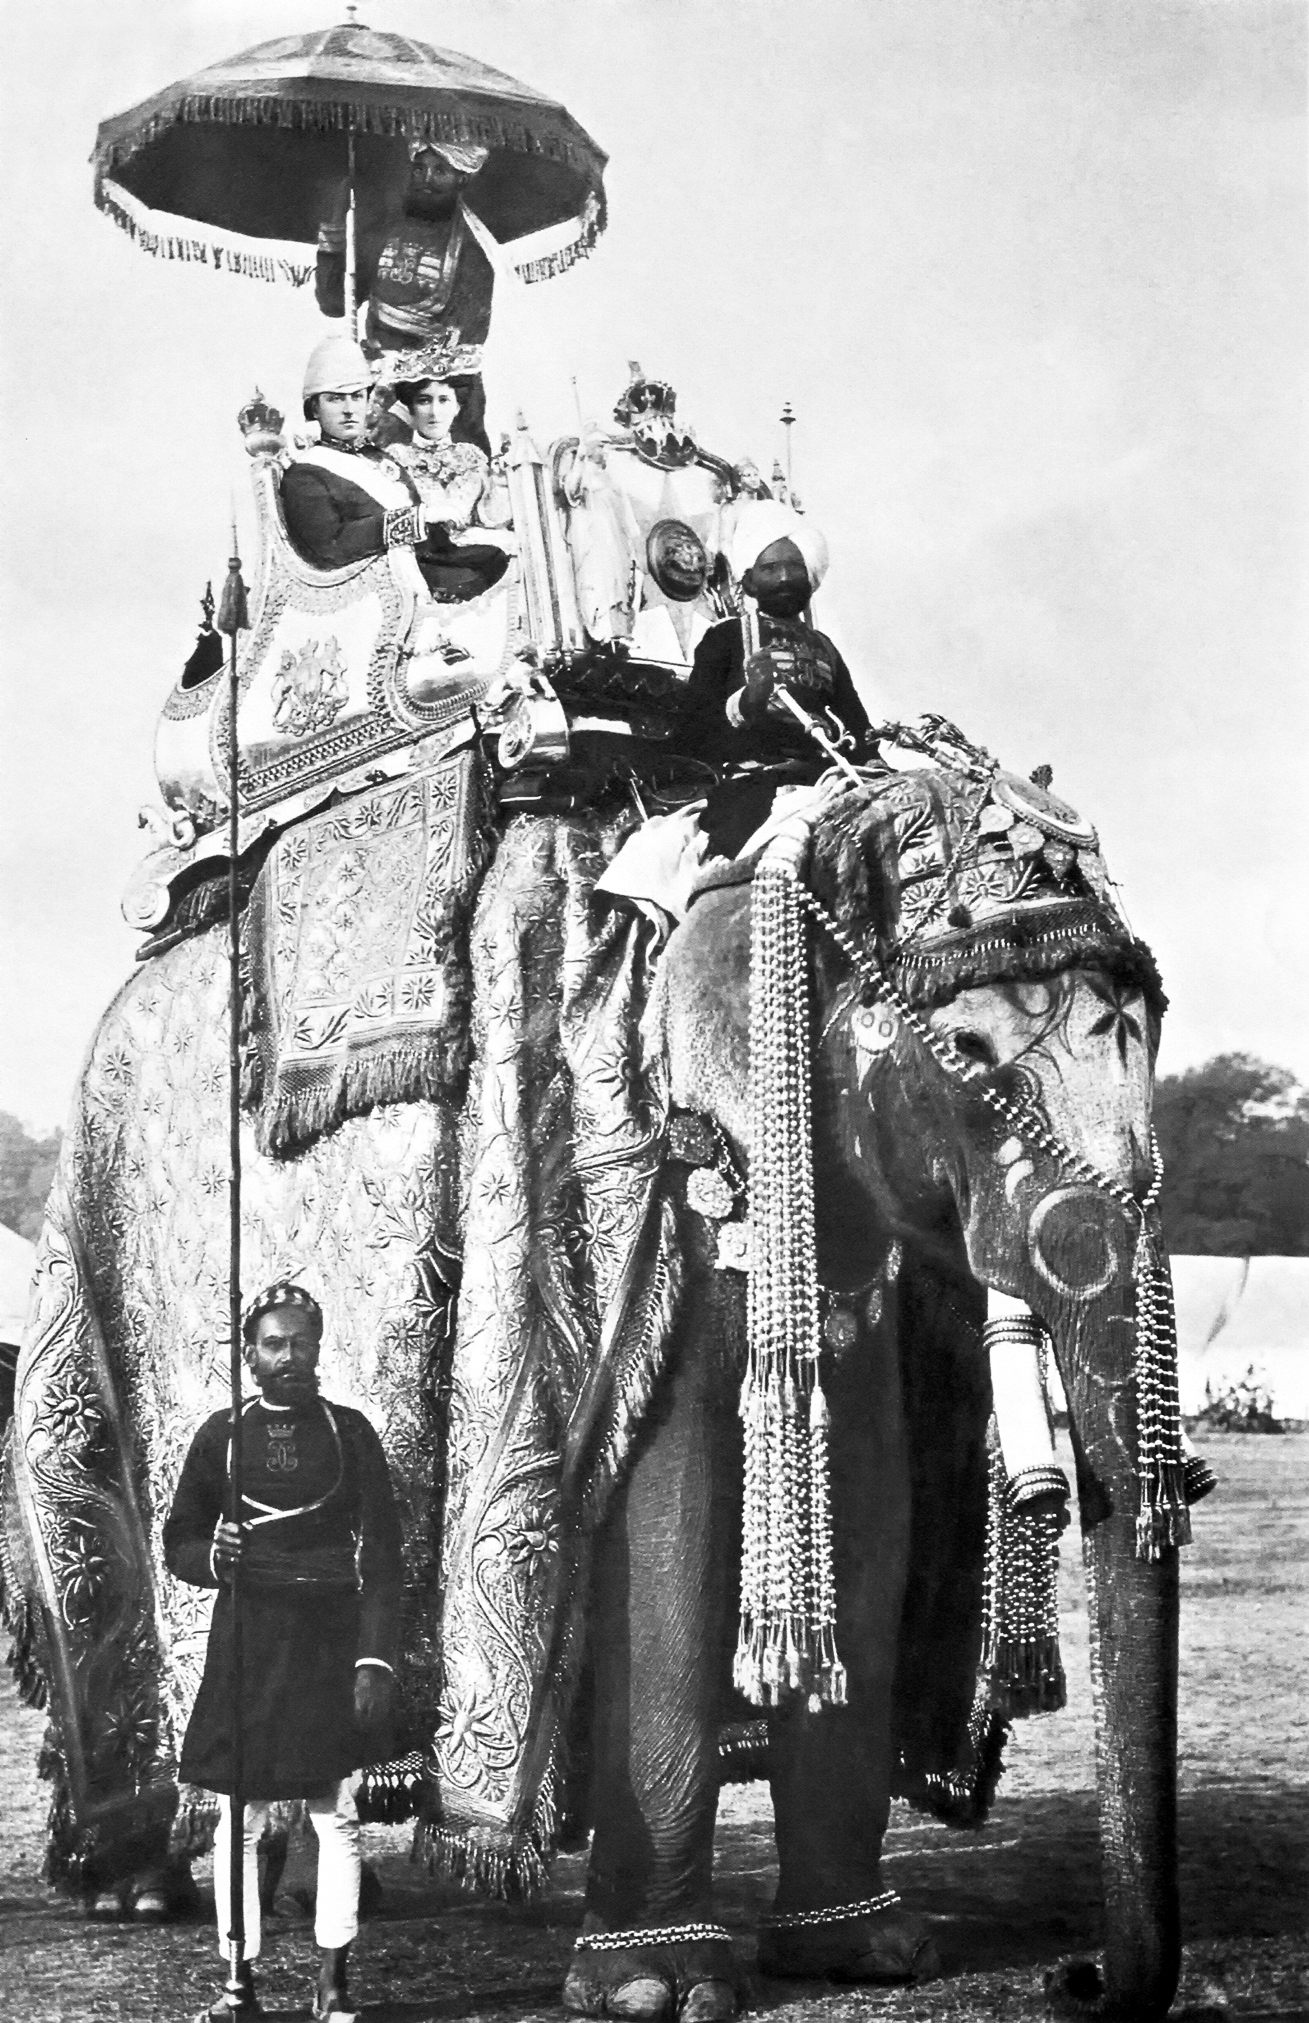 George Curzon and Mary Curzon on the elephant Lakshman Prasad 1902-12-29 in Delhi